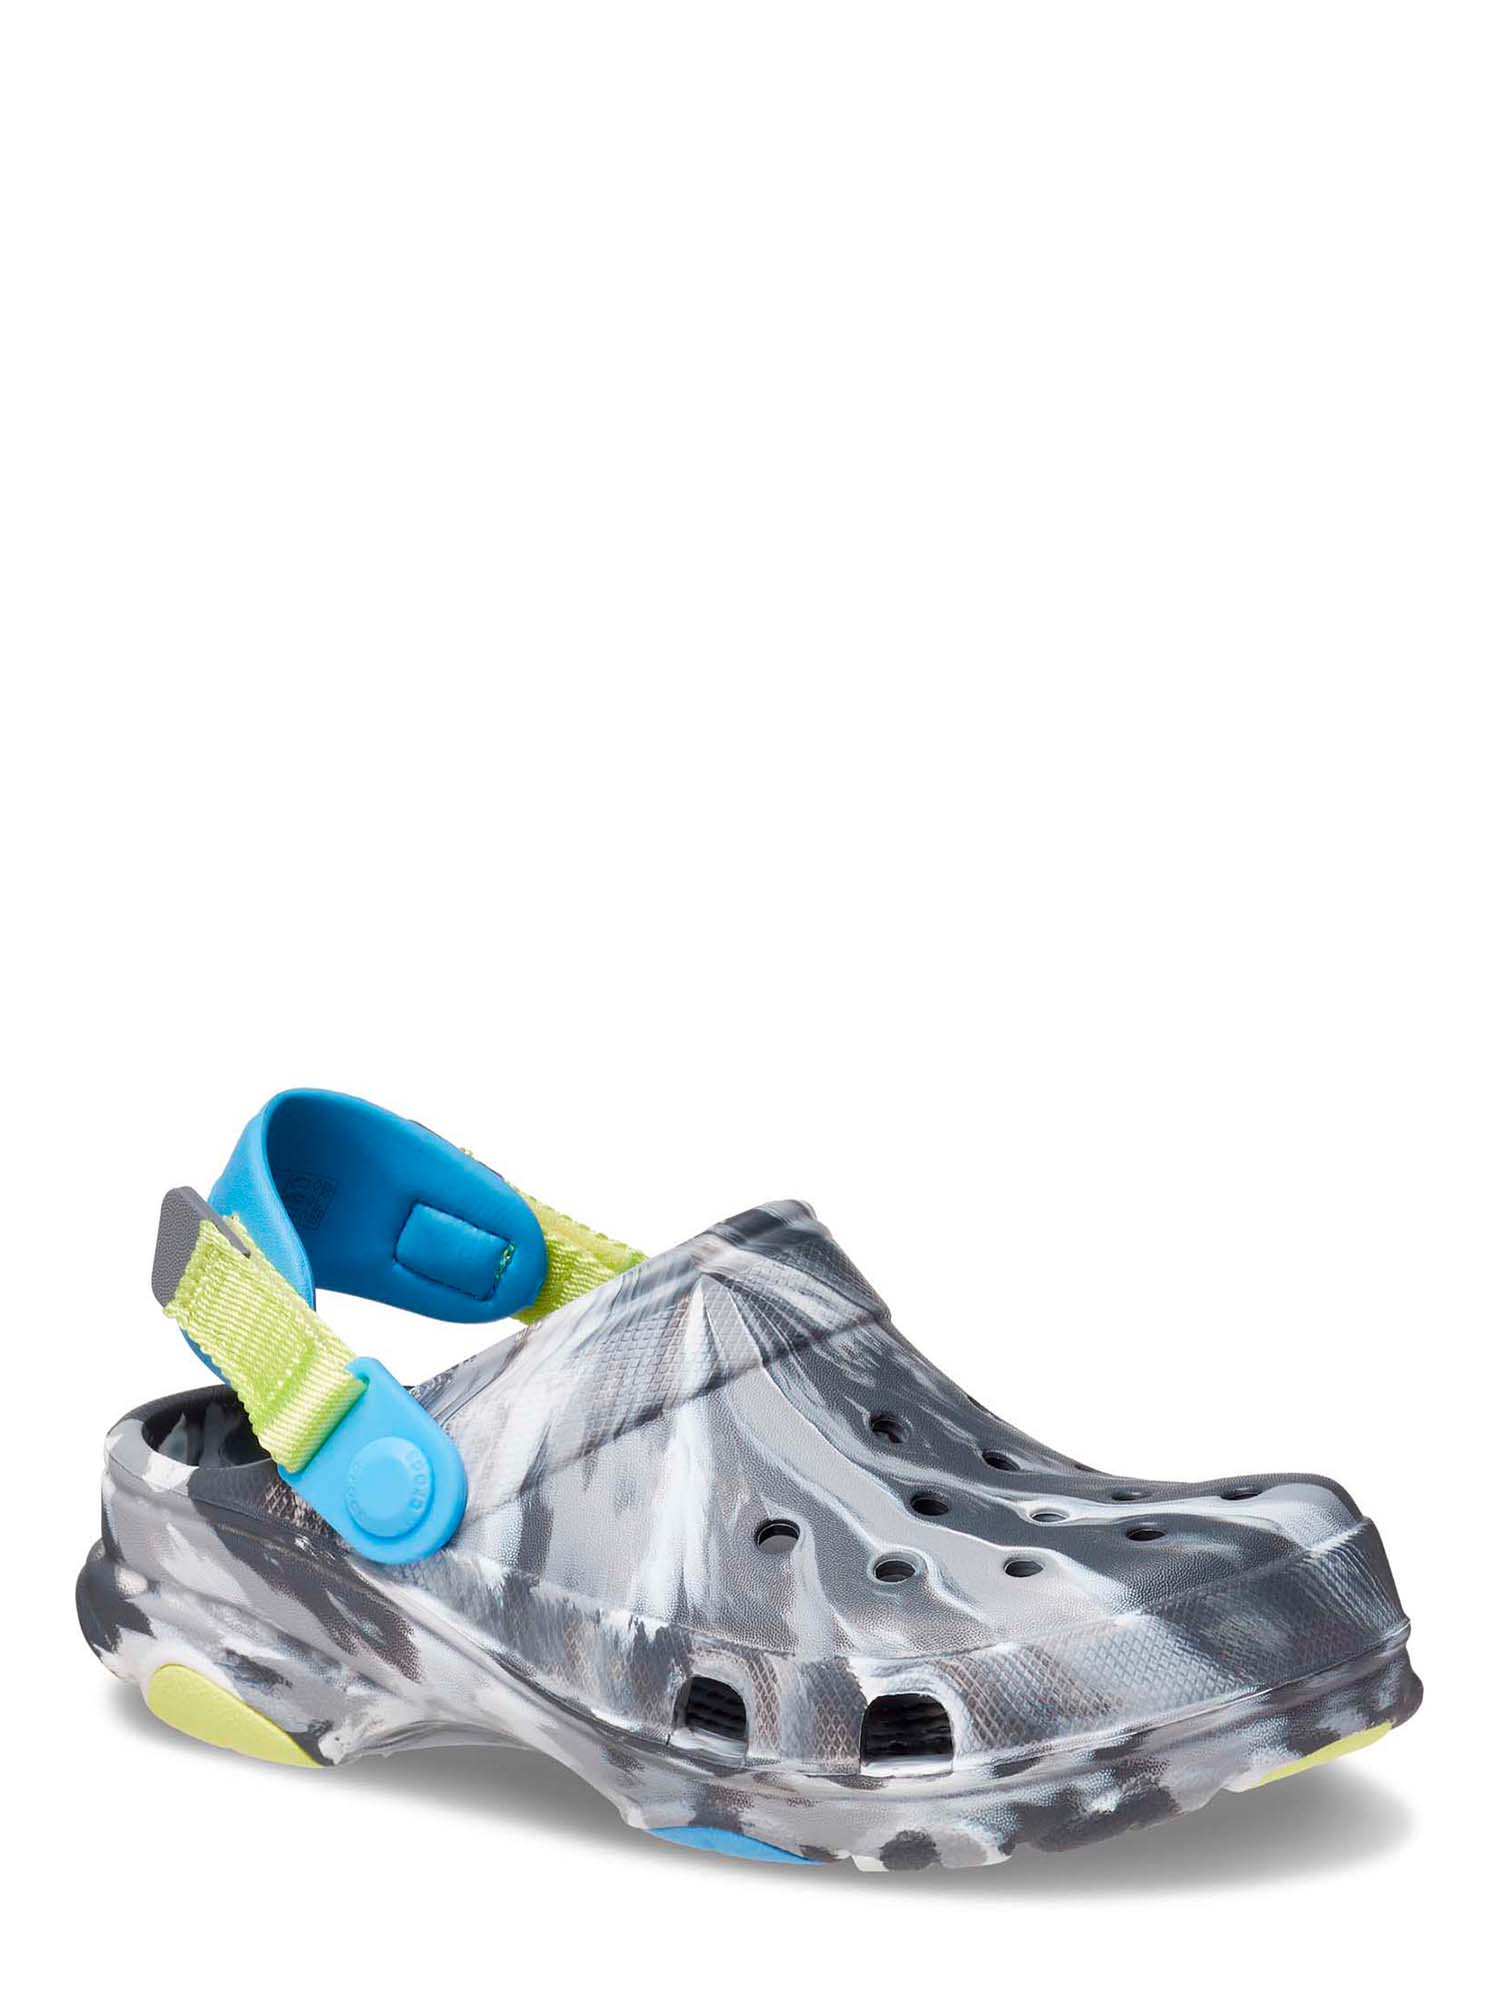 Crocs Toddler Classic All-Terrain Marbled Clog - image 1 of 6